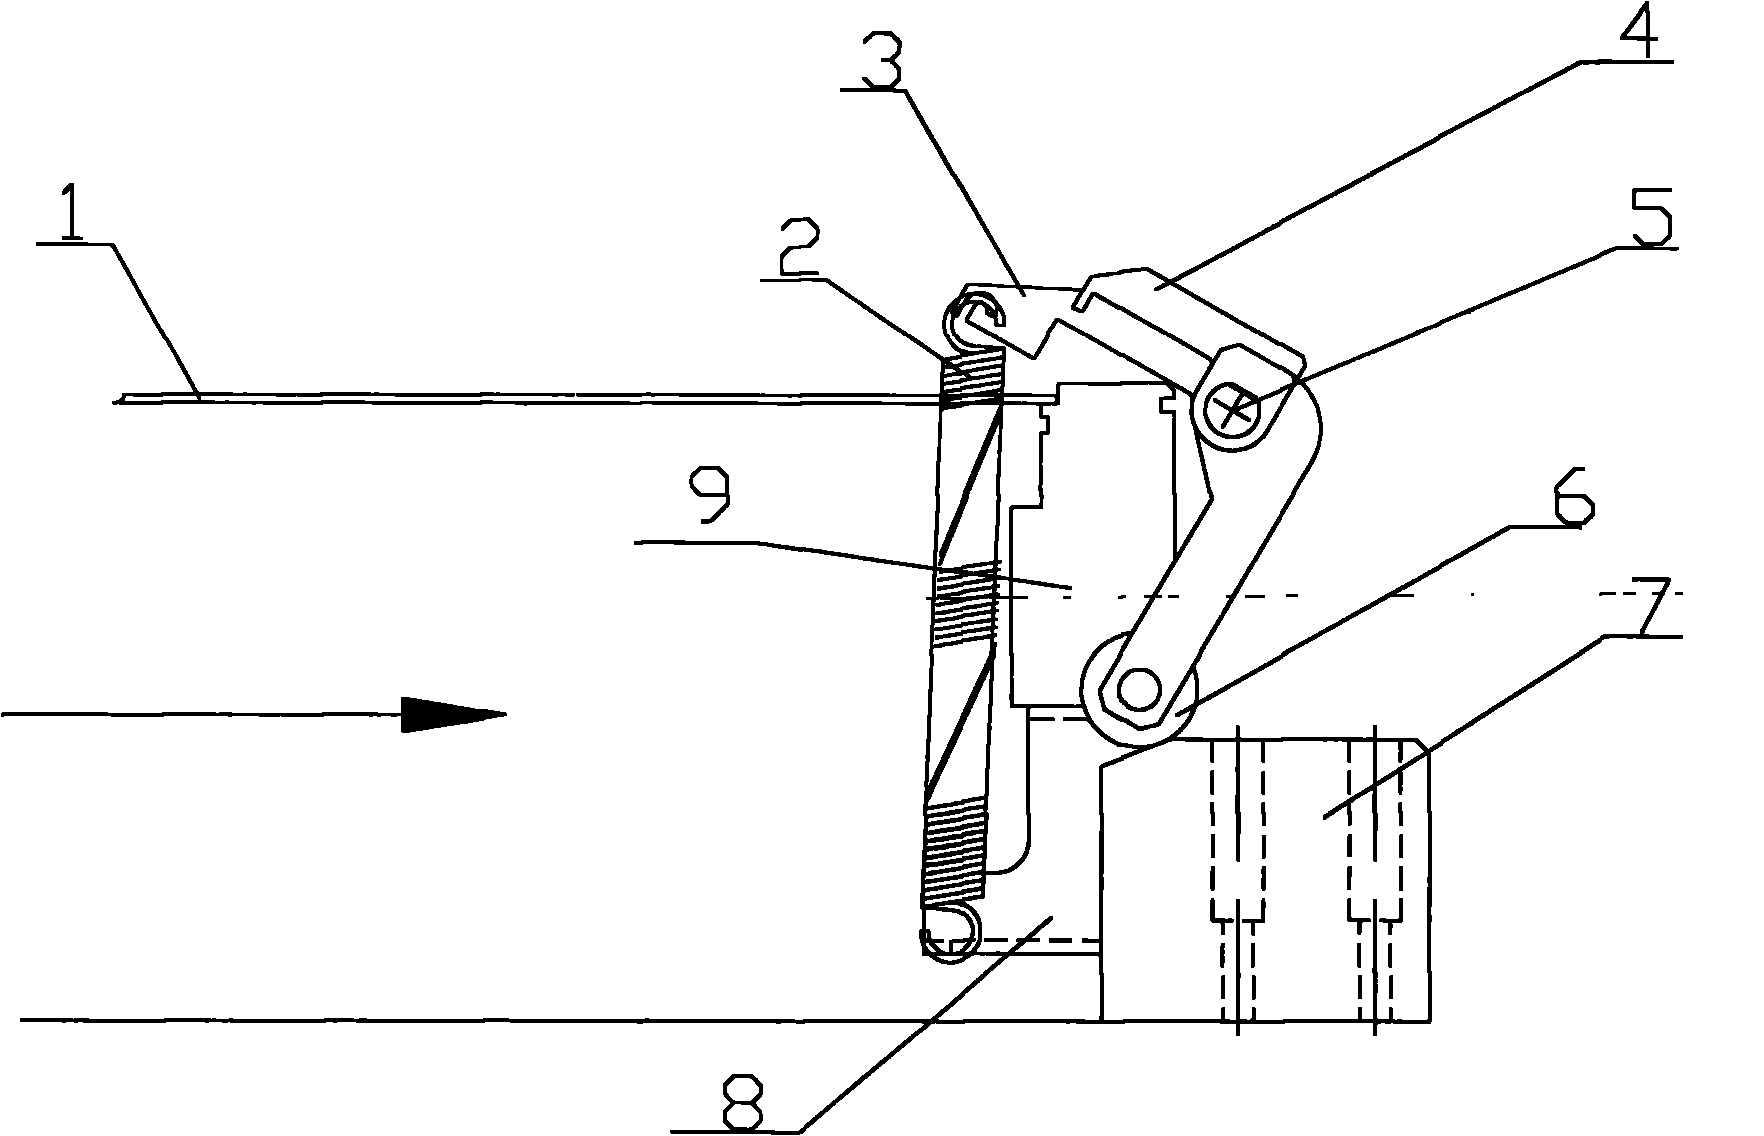 Compressing device of optical inspection instrument